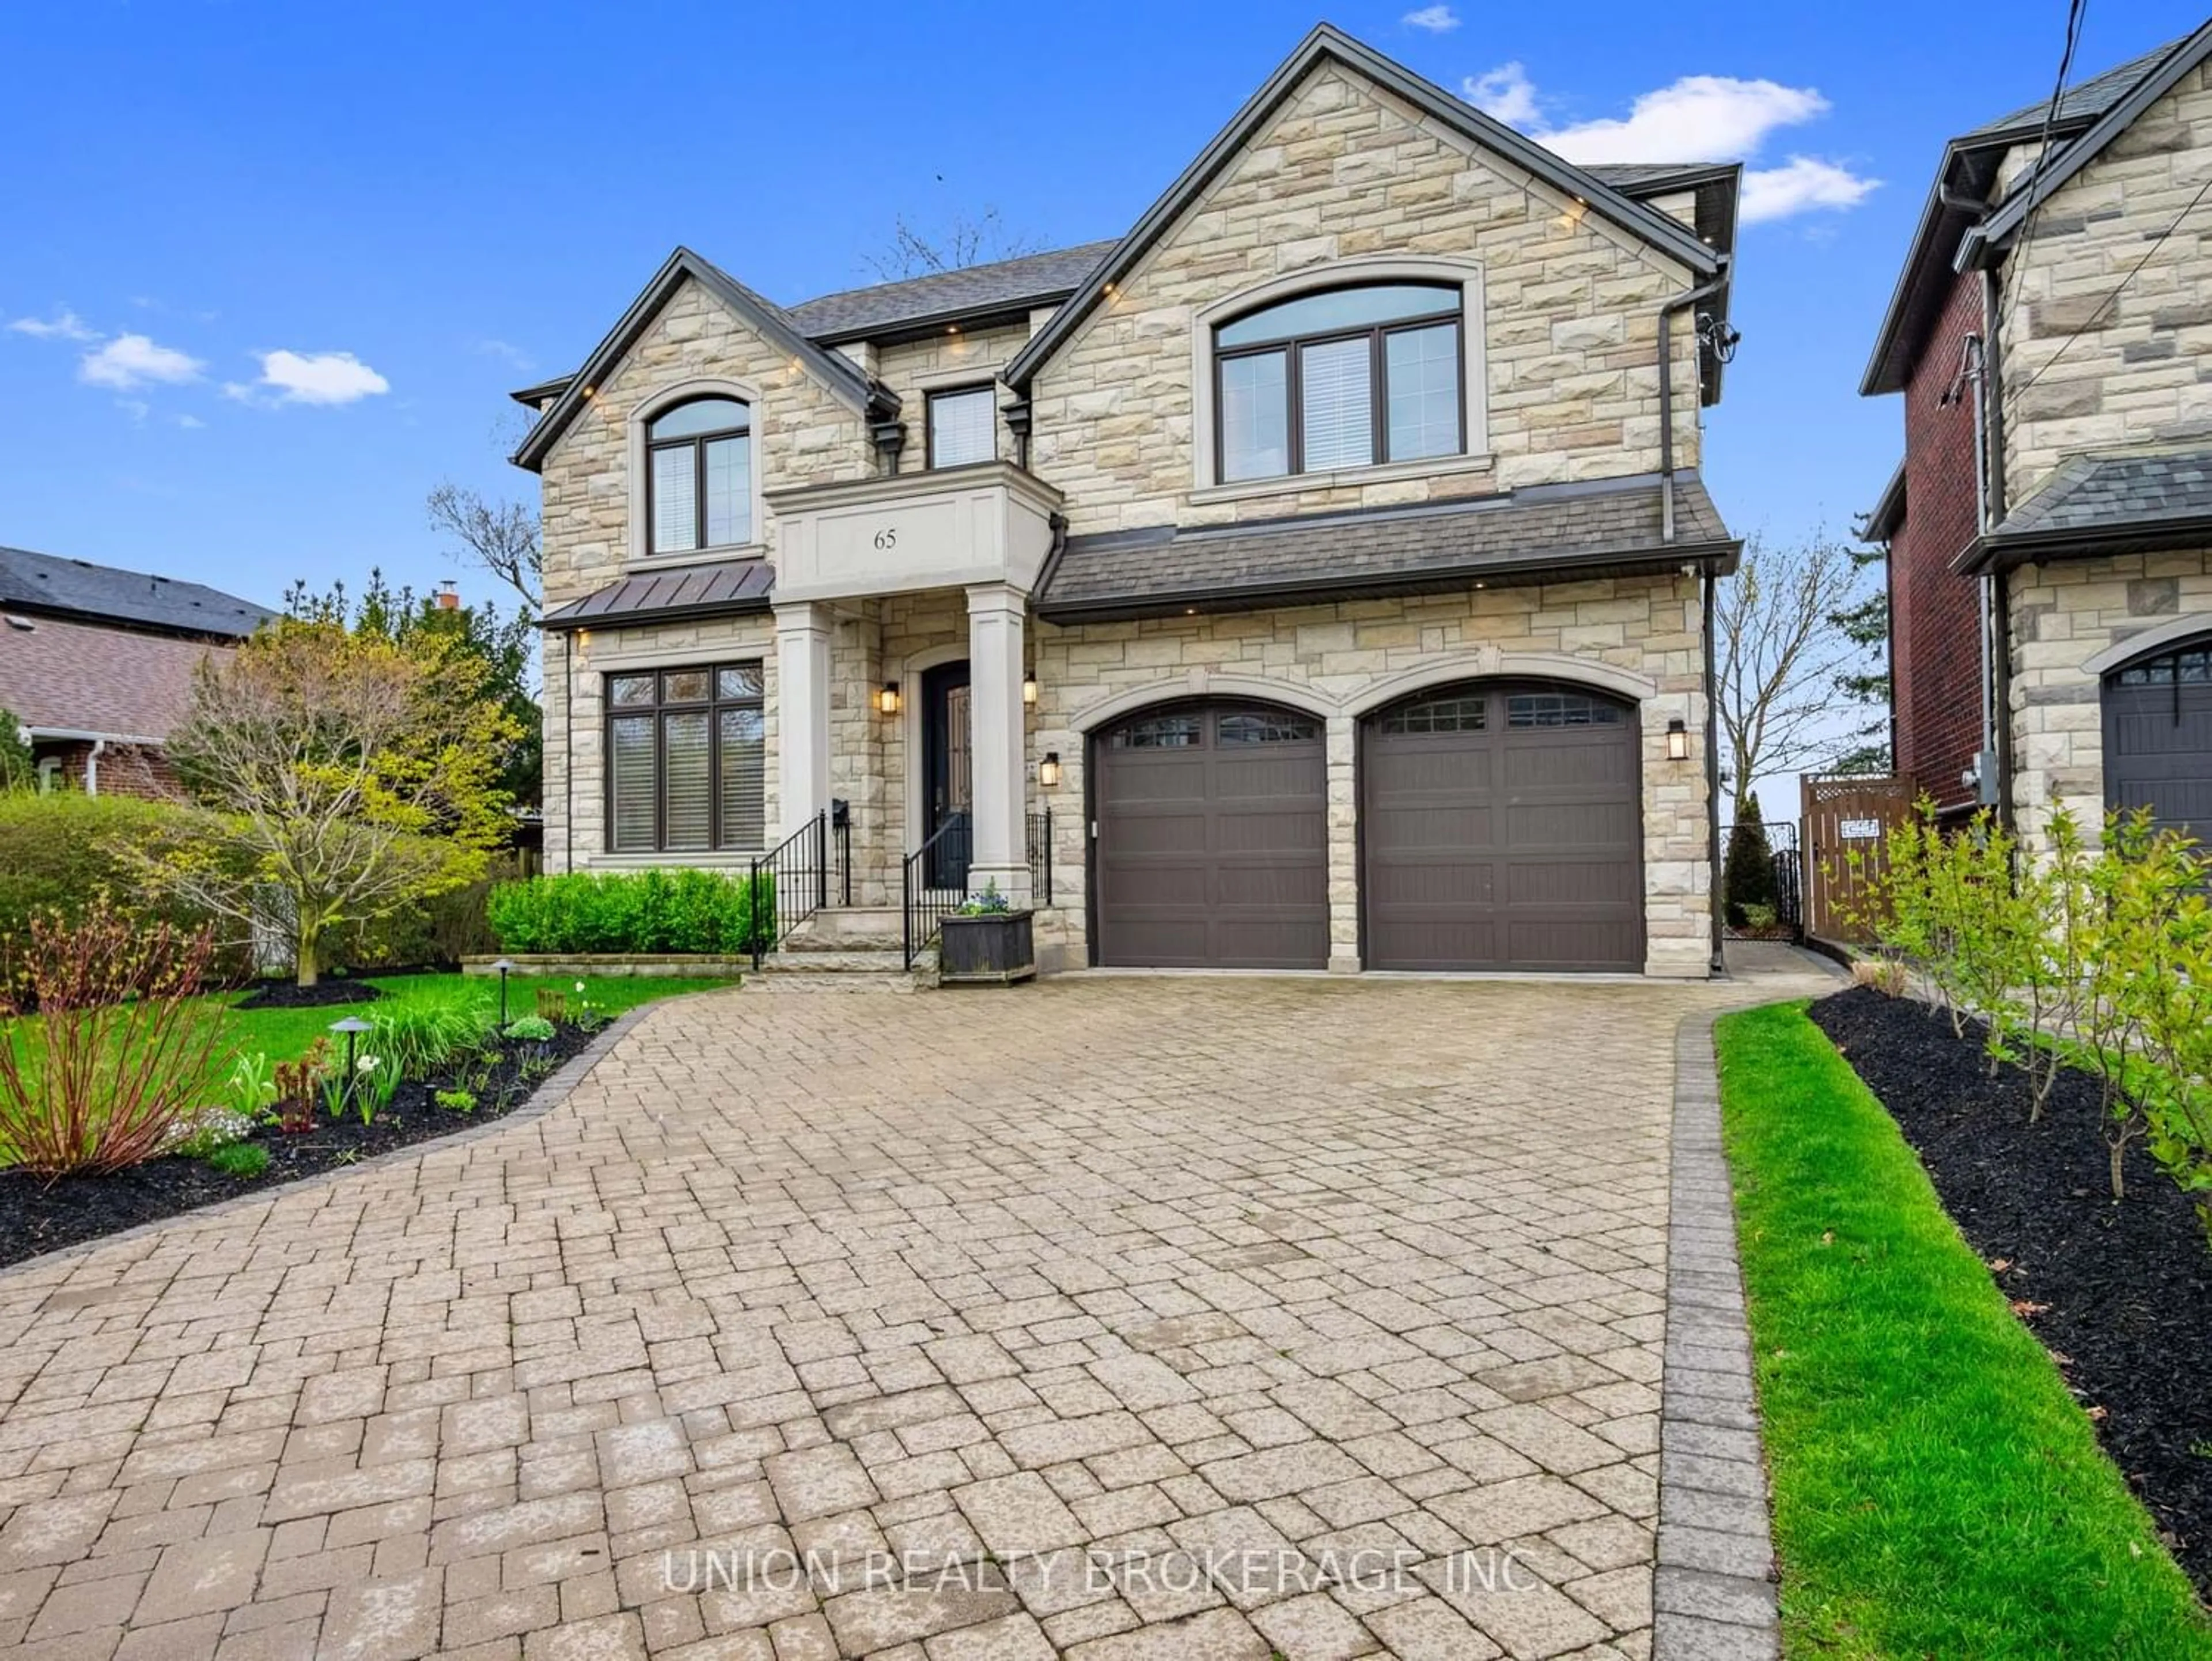 Home with brick exterior material for 65 Fishleigh Dr, Toronto Ontario M1N 1H3